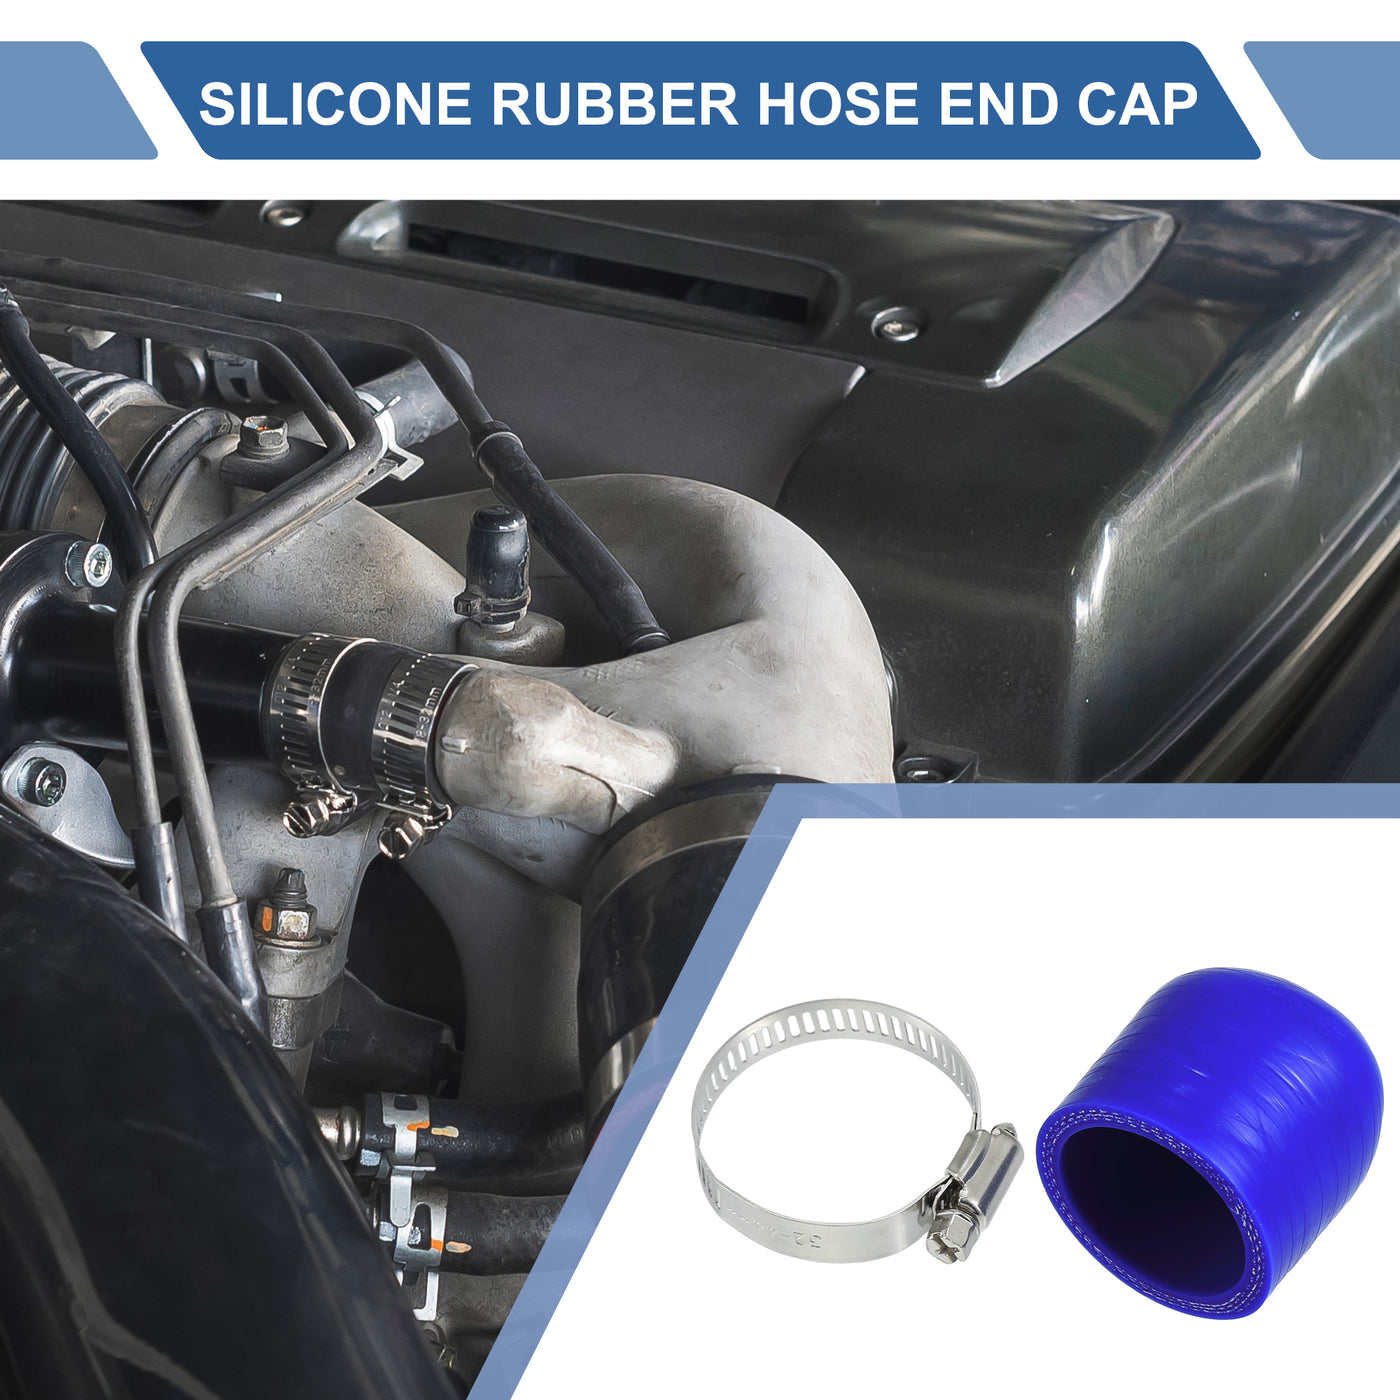 X AUTOHAUX 1 Set 30mm Length 35mm/1.38" ID Blue Car Silicone Rubber Hose End Cap with Clamps Silicone Reinforced Blanking Cap for Bypass Tube Universal